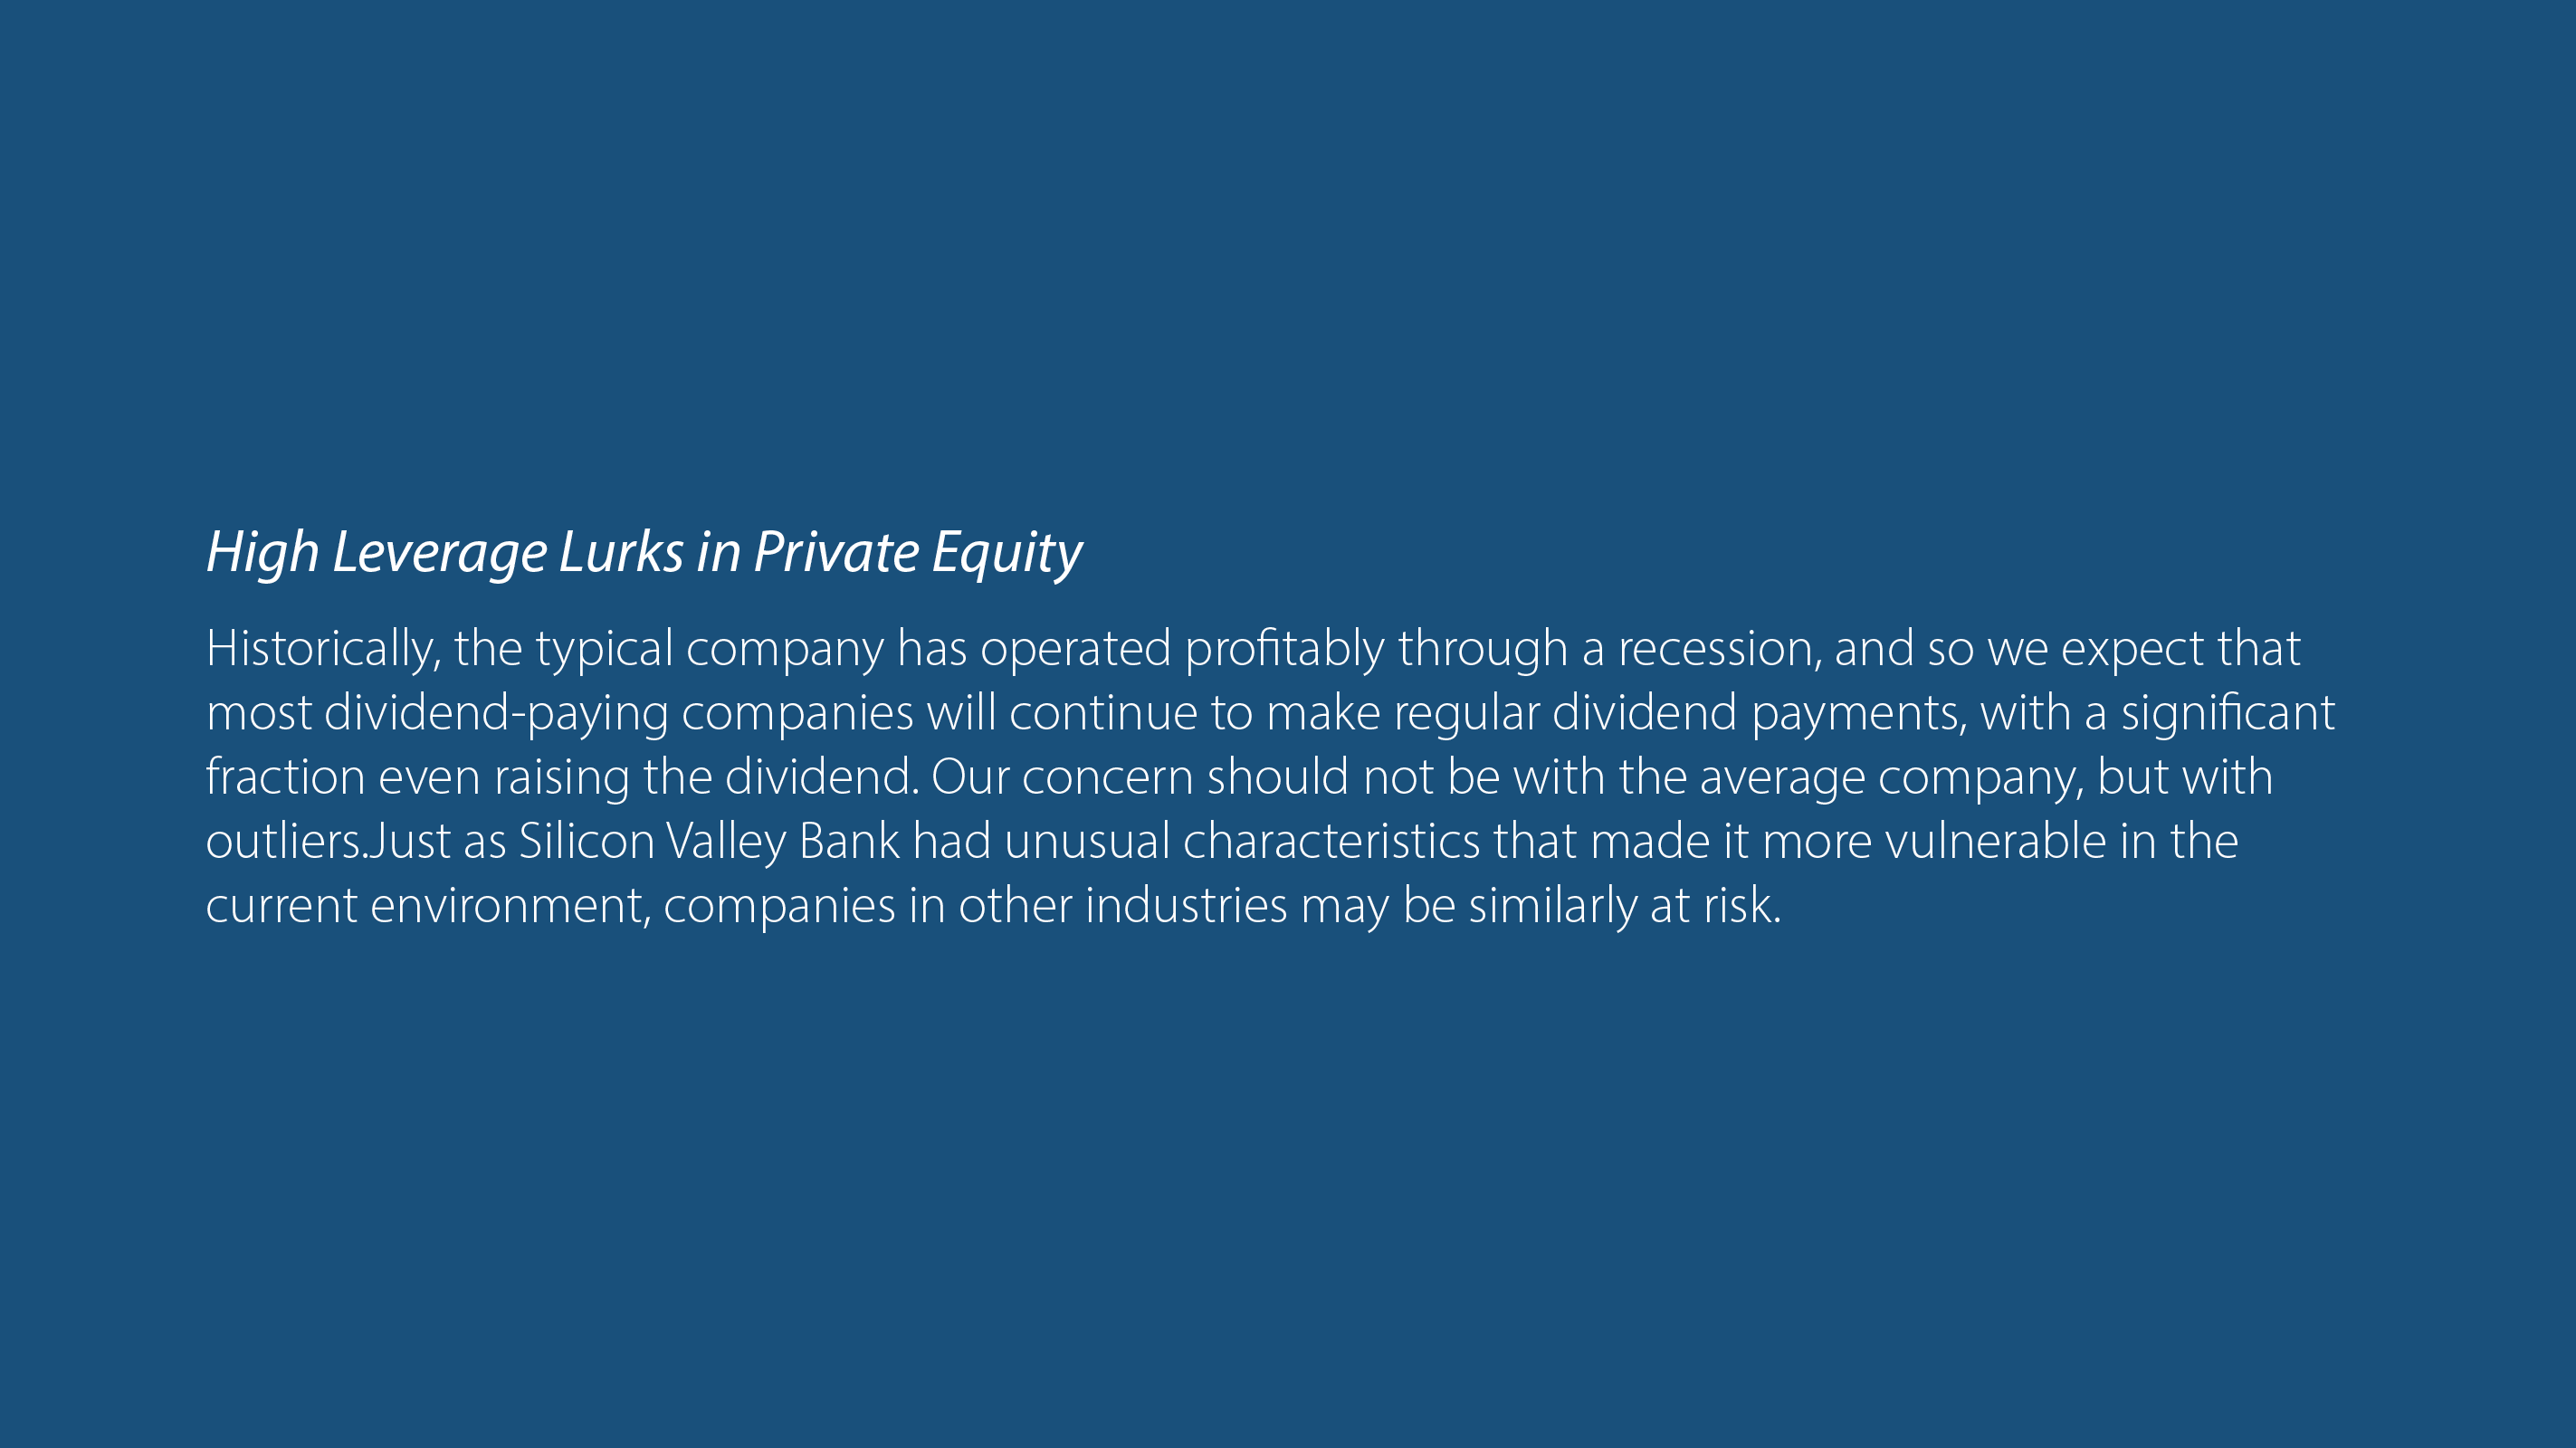 High Leverage Lurks in Private Equity